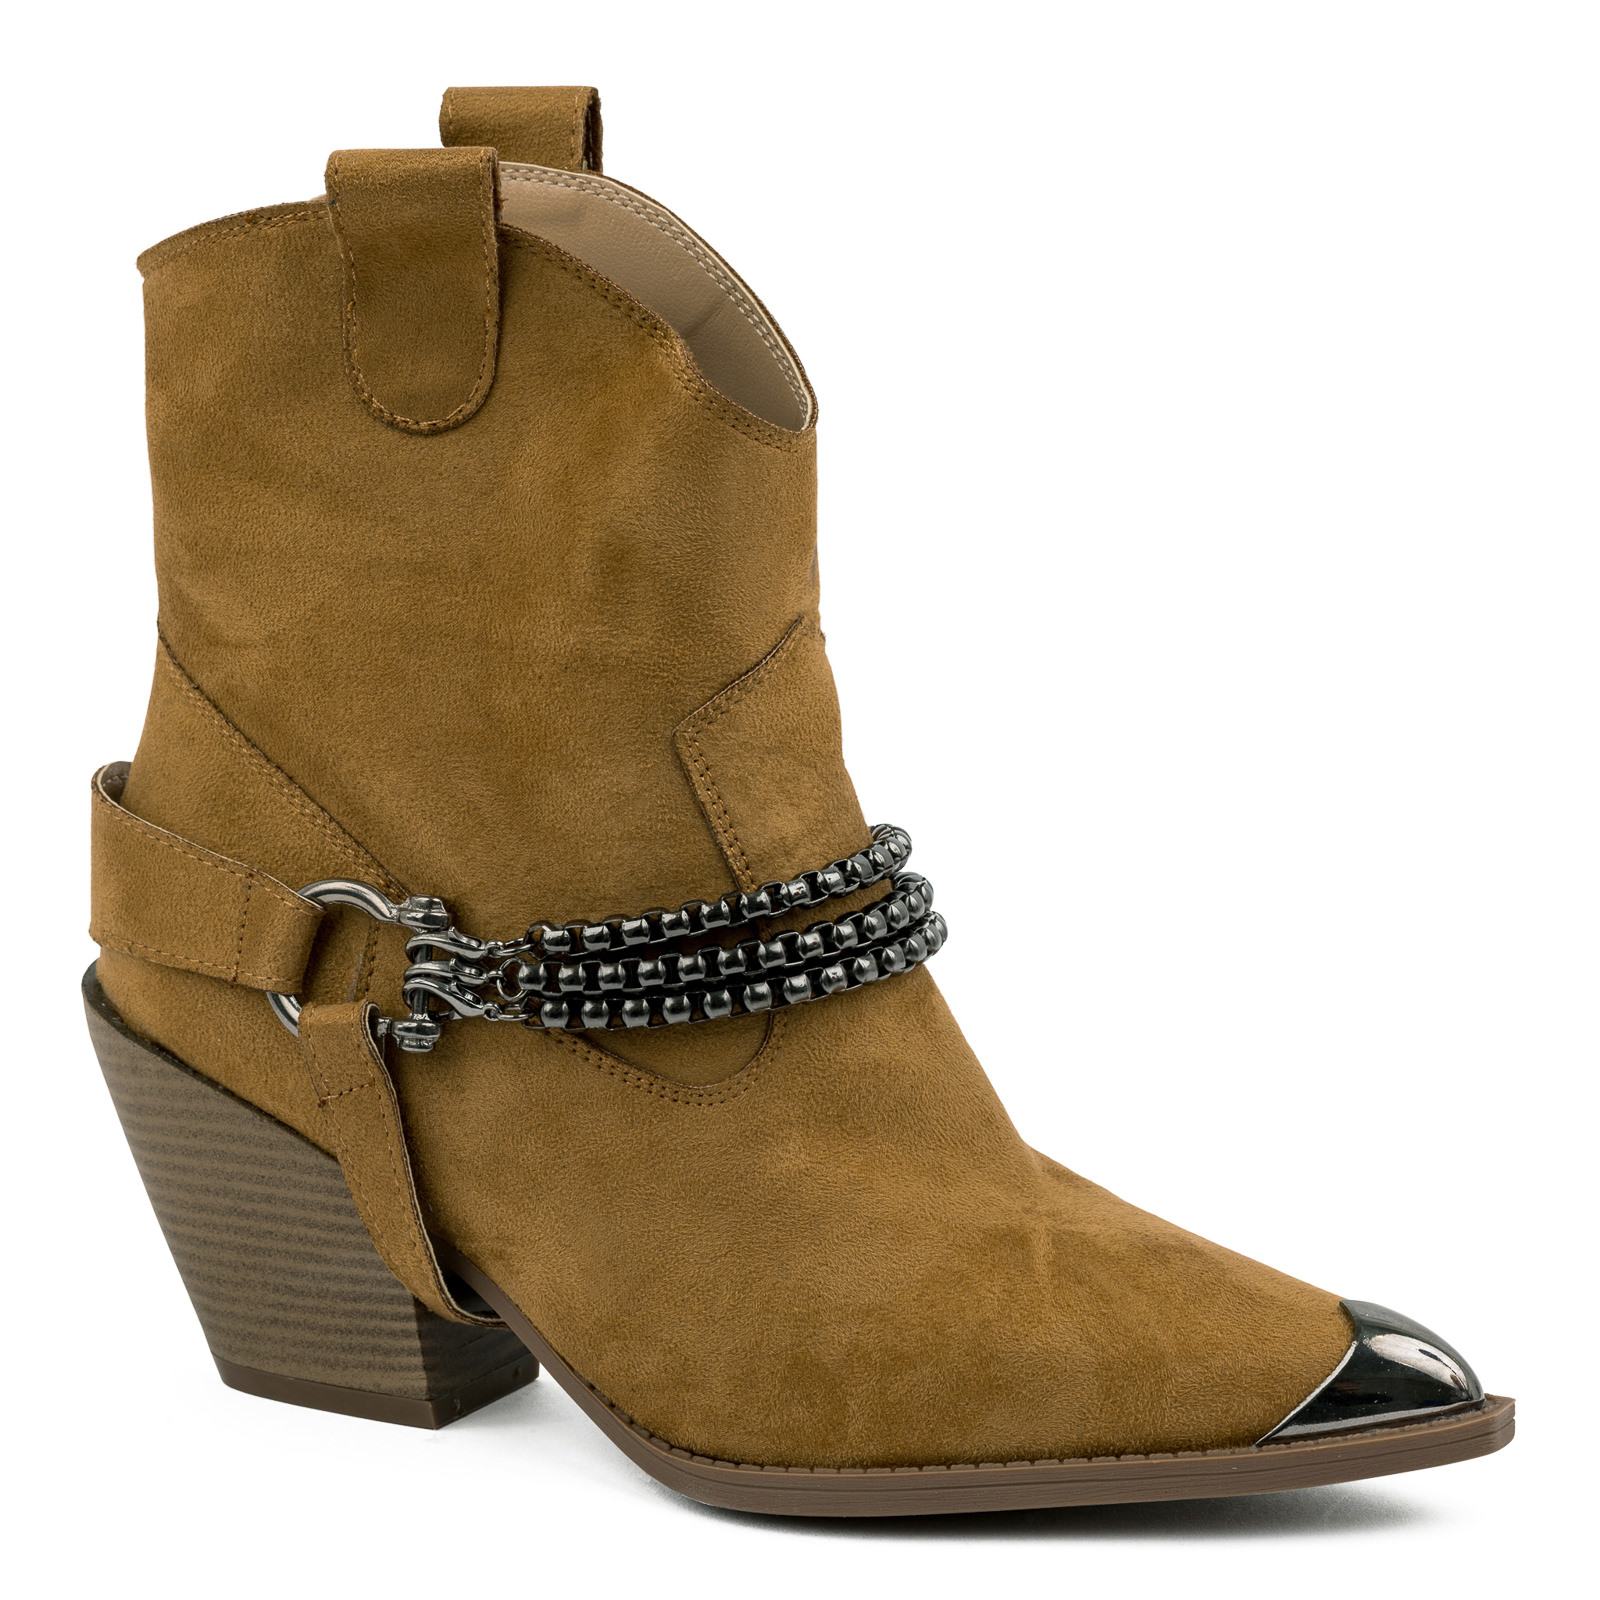 VELOUR SPIKE COW GIRL WITH THICK HEEL AND CHAIN - BROWN